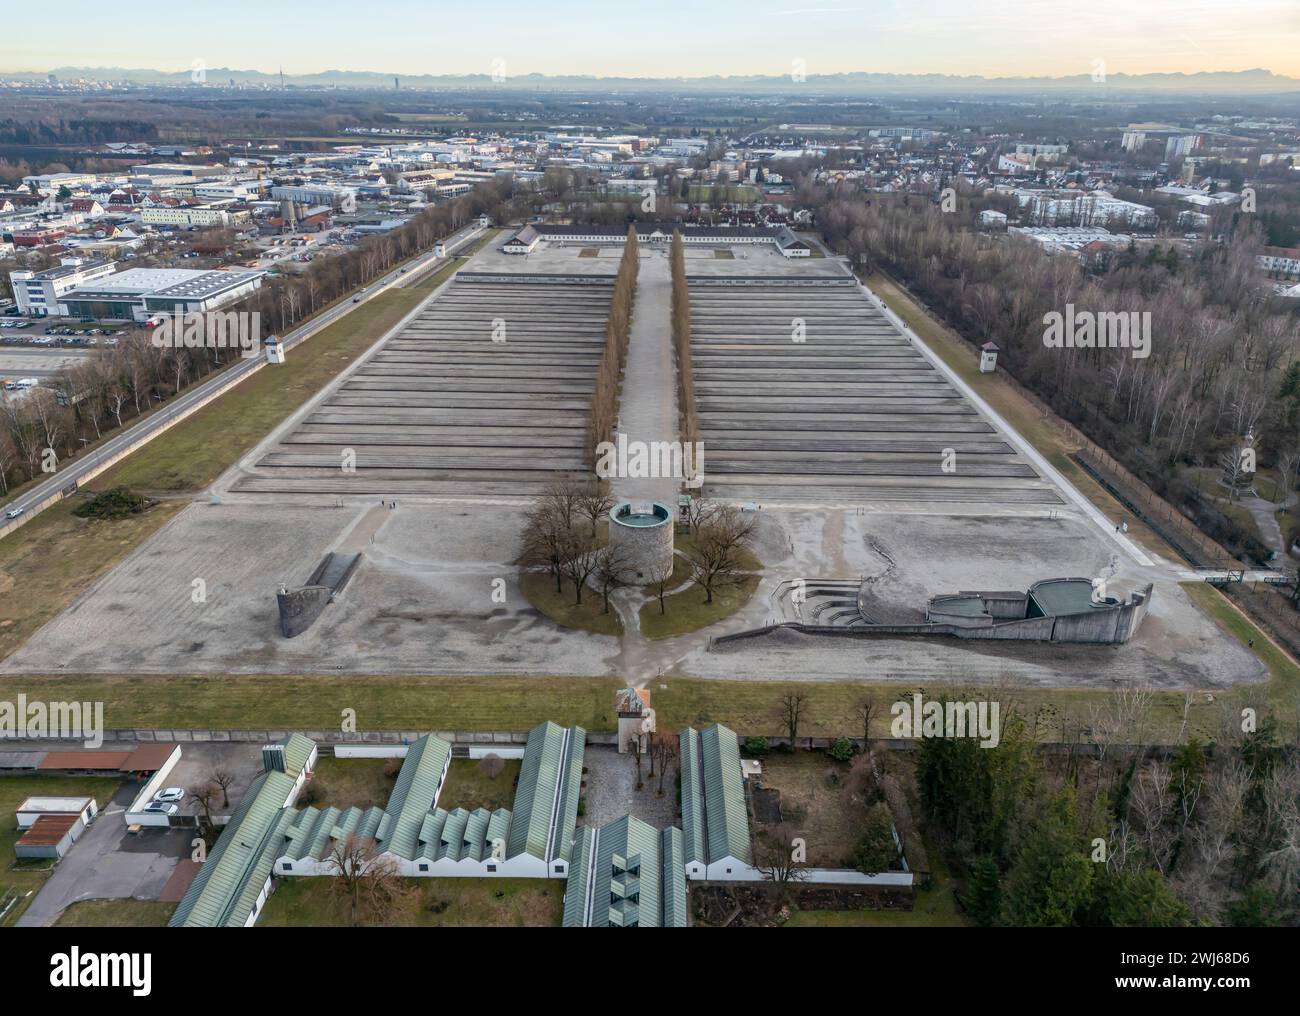 aerial View of the Dachau Concentration Camp in Bavaria, Germany. Stock Photo